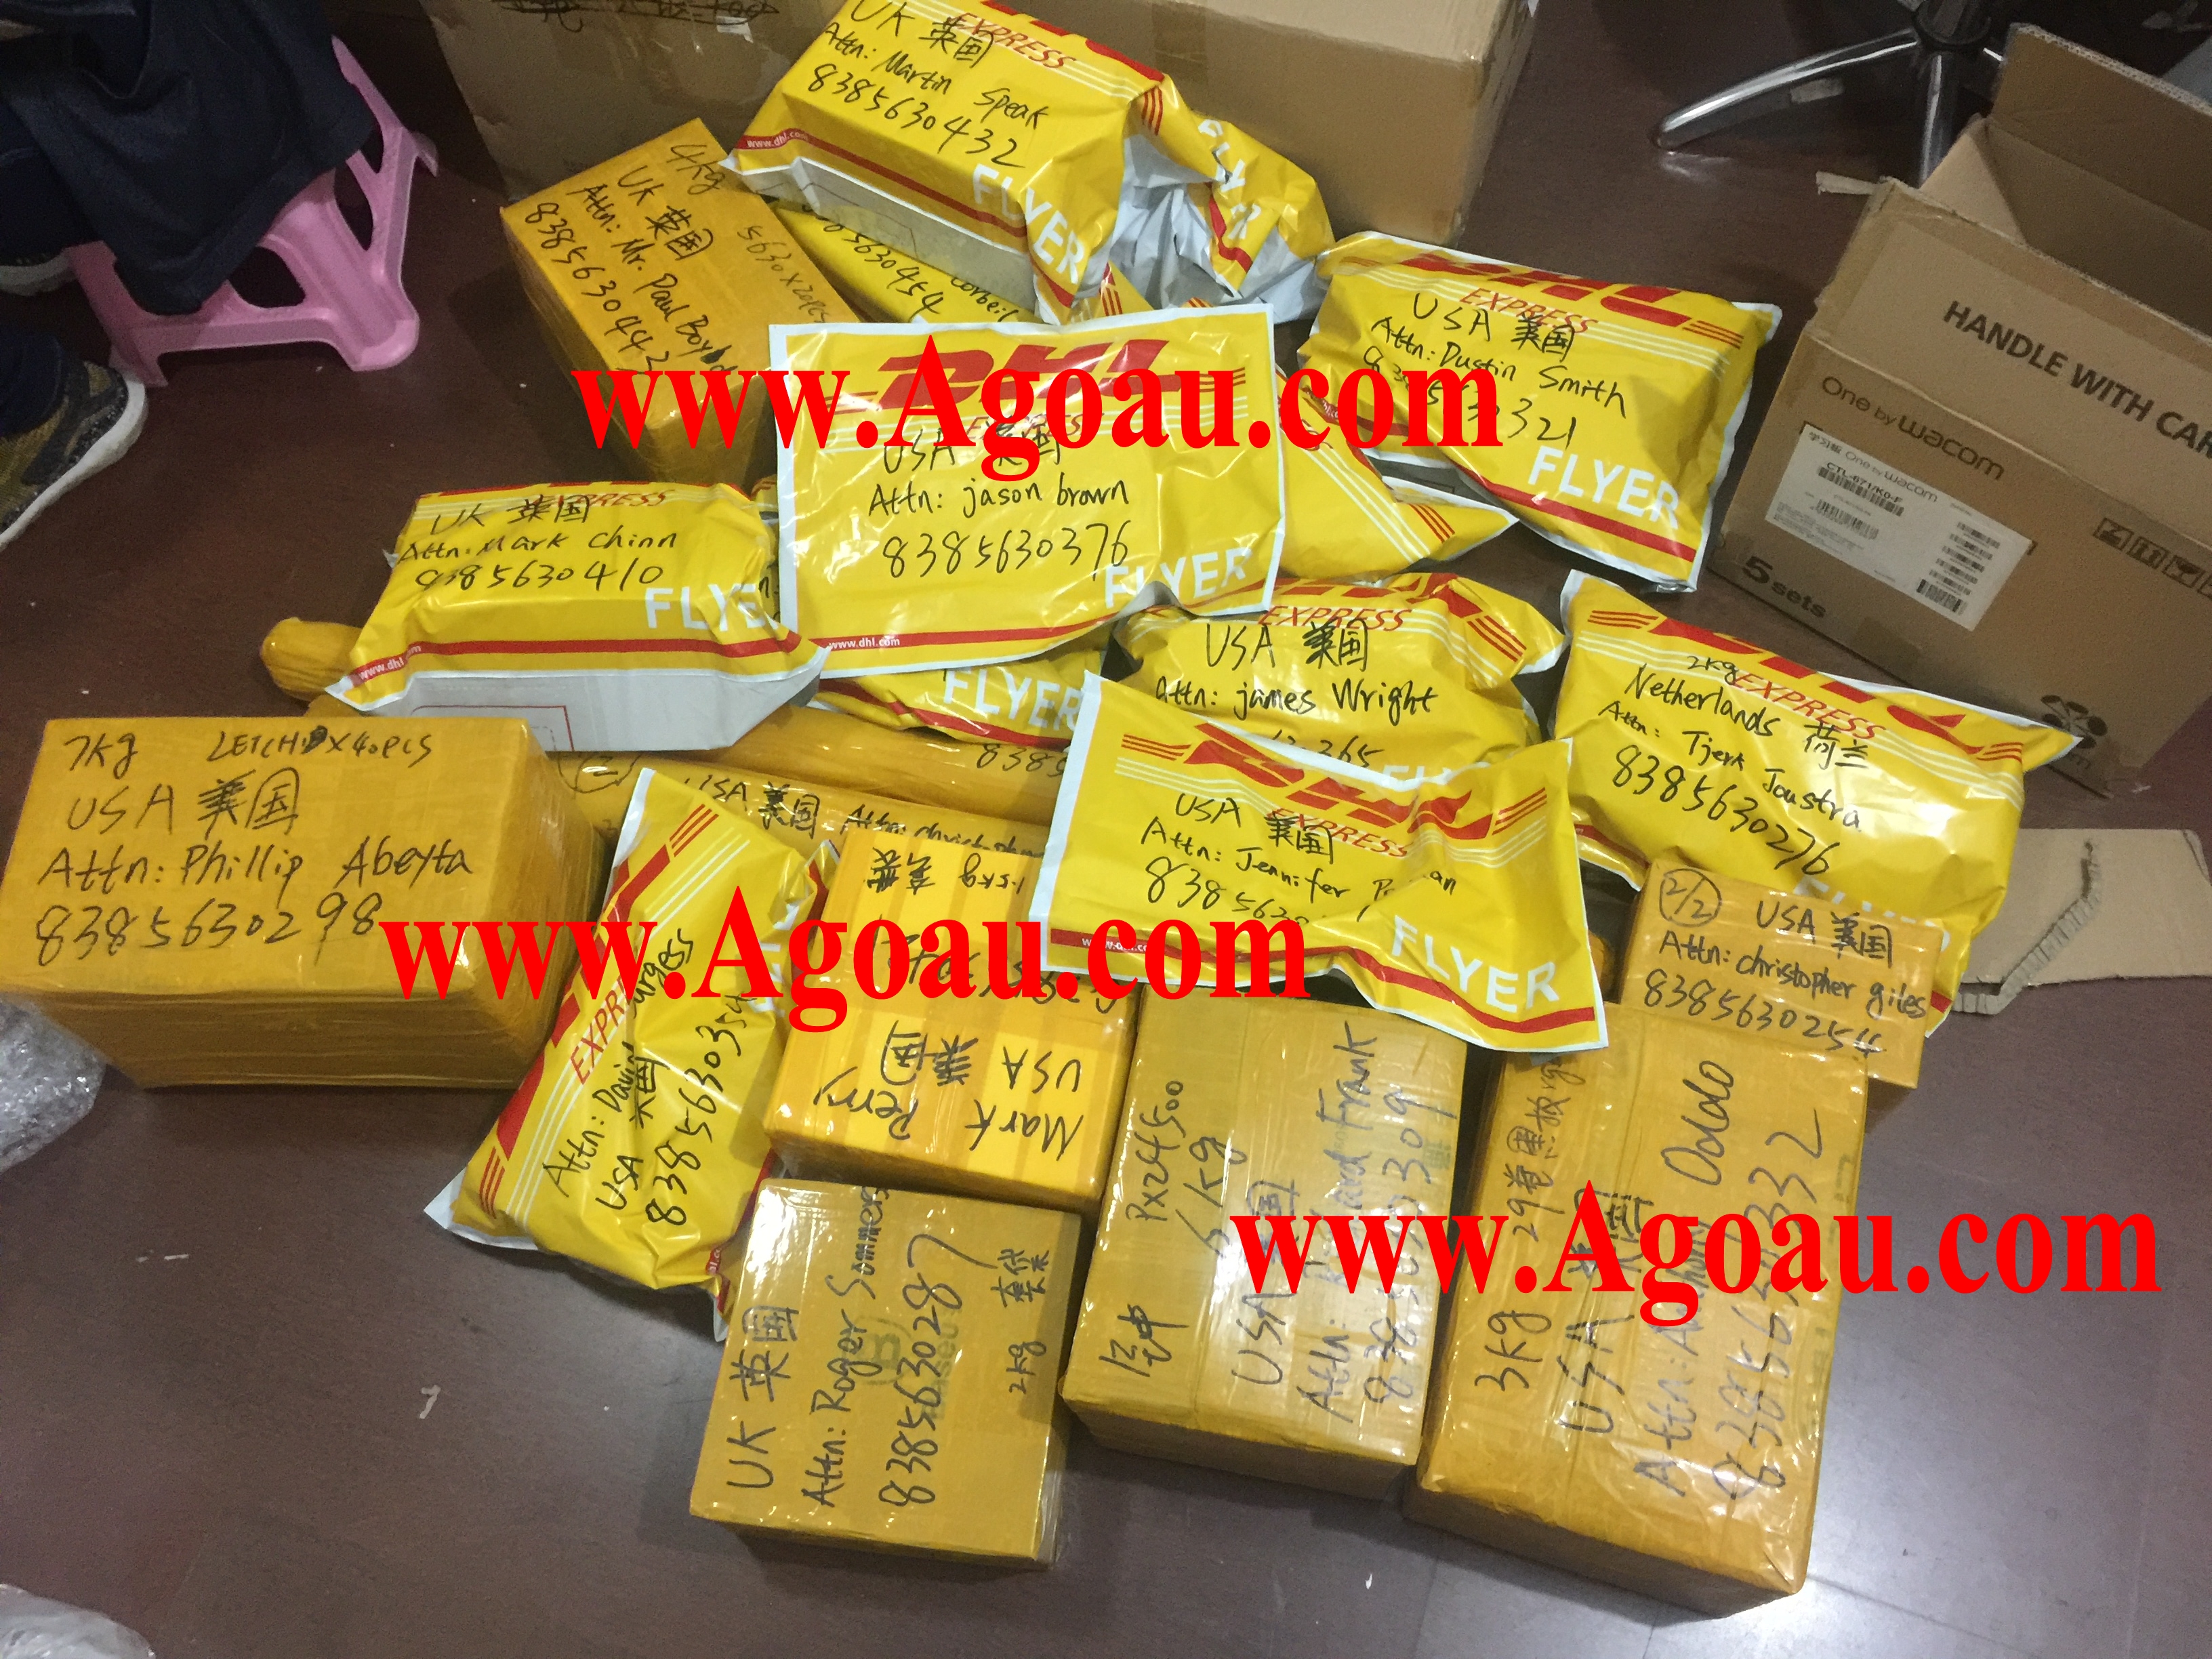 Parcels_shipping_from_agoau_to_UK_USA_2